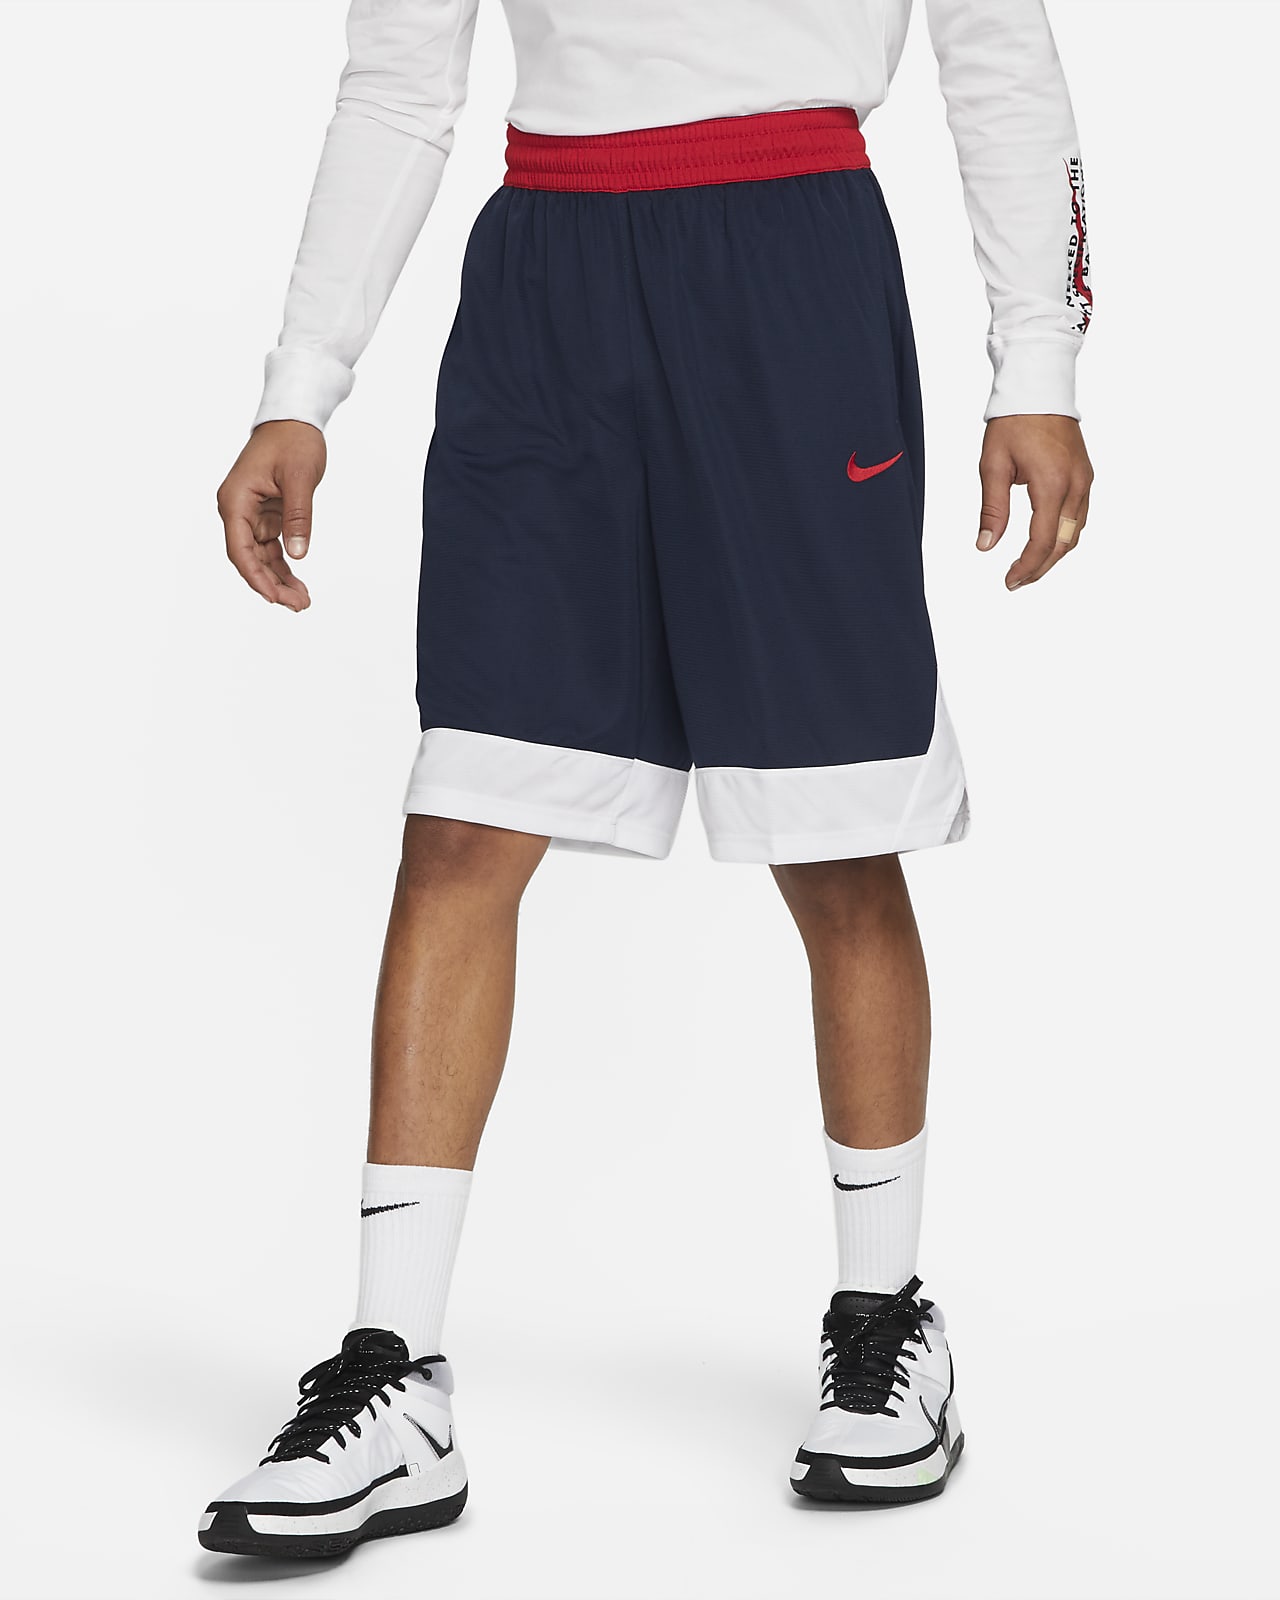 grey and red nike shorts